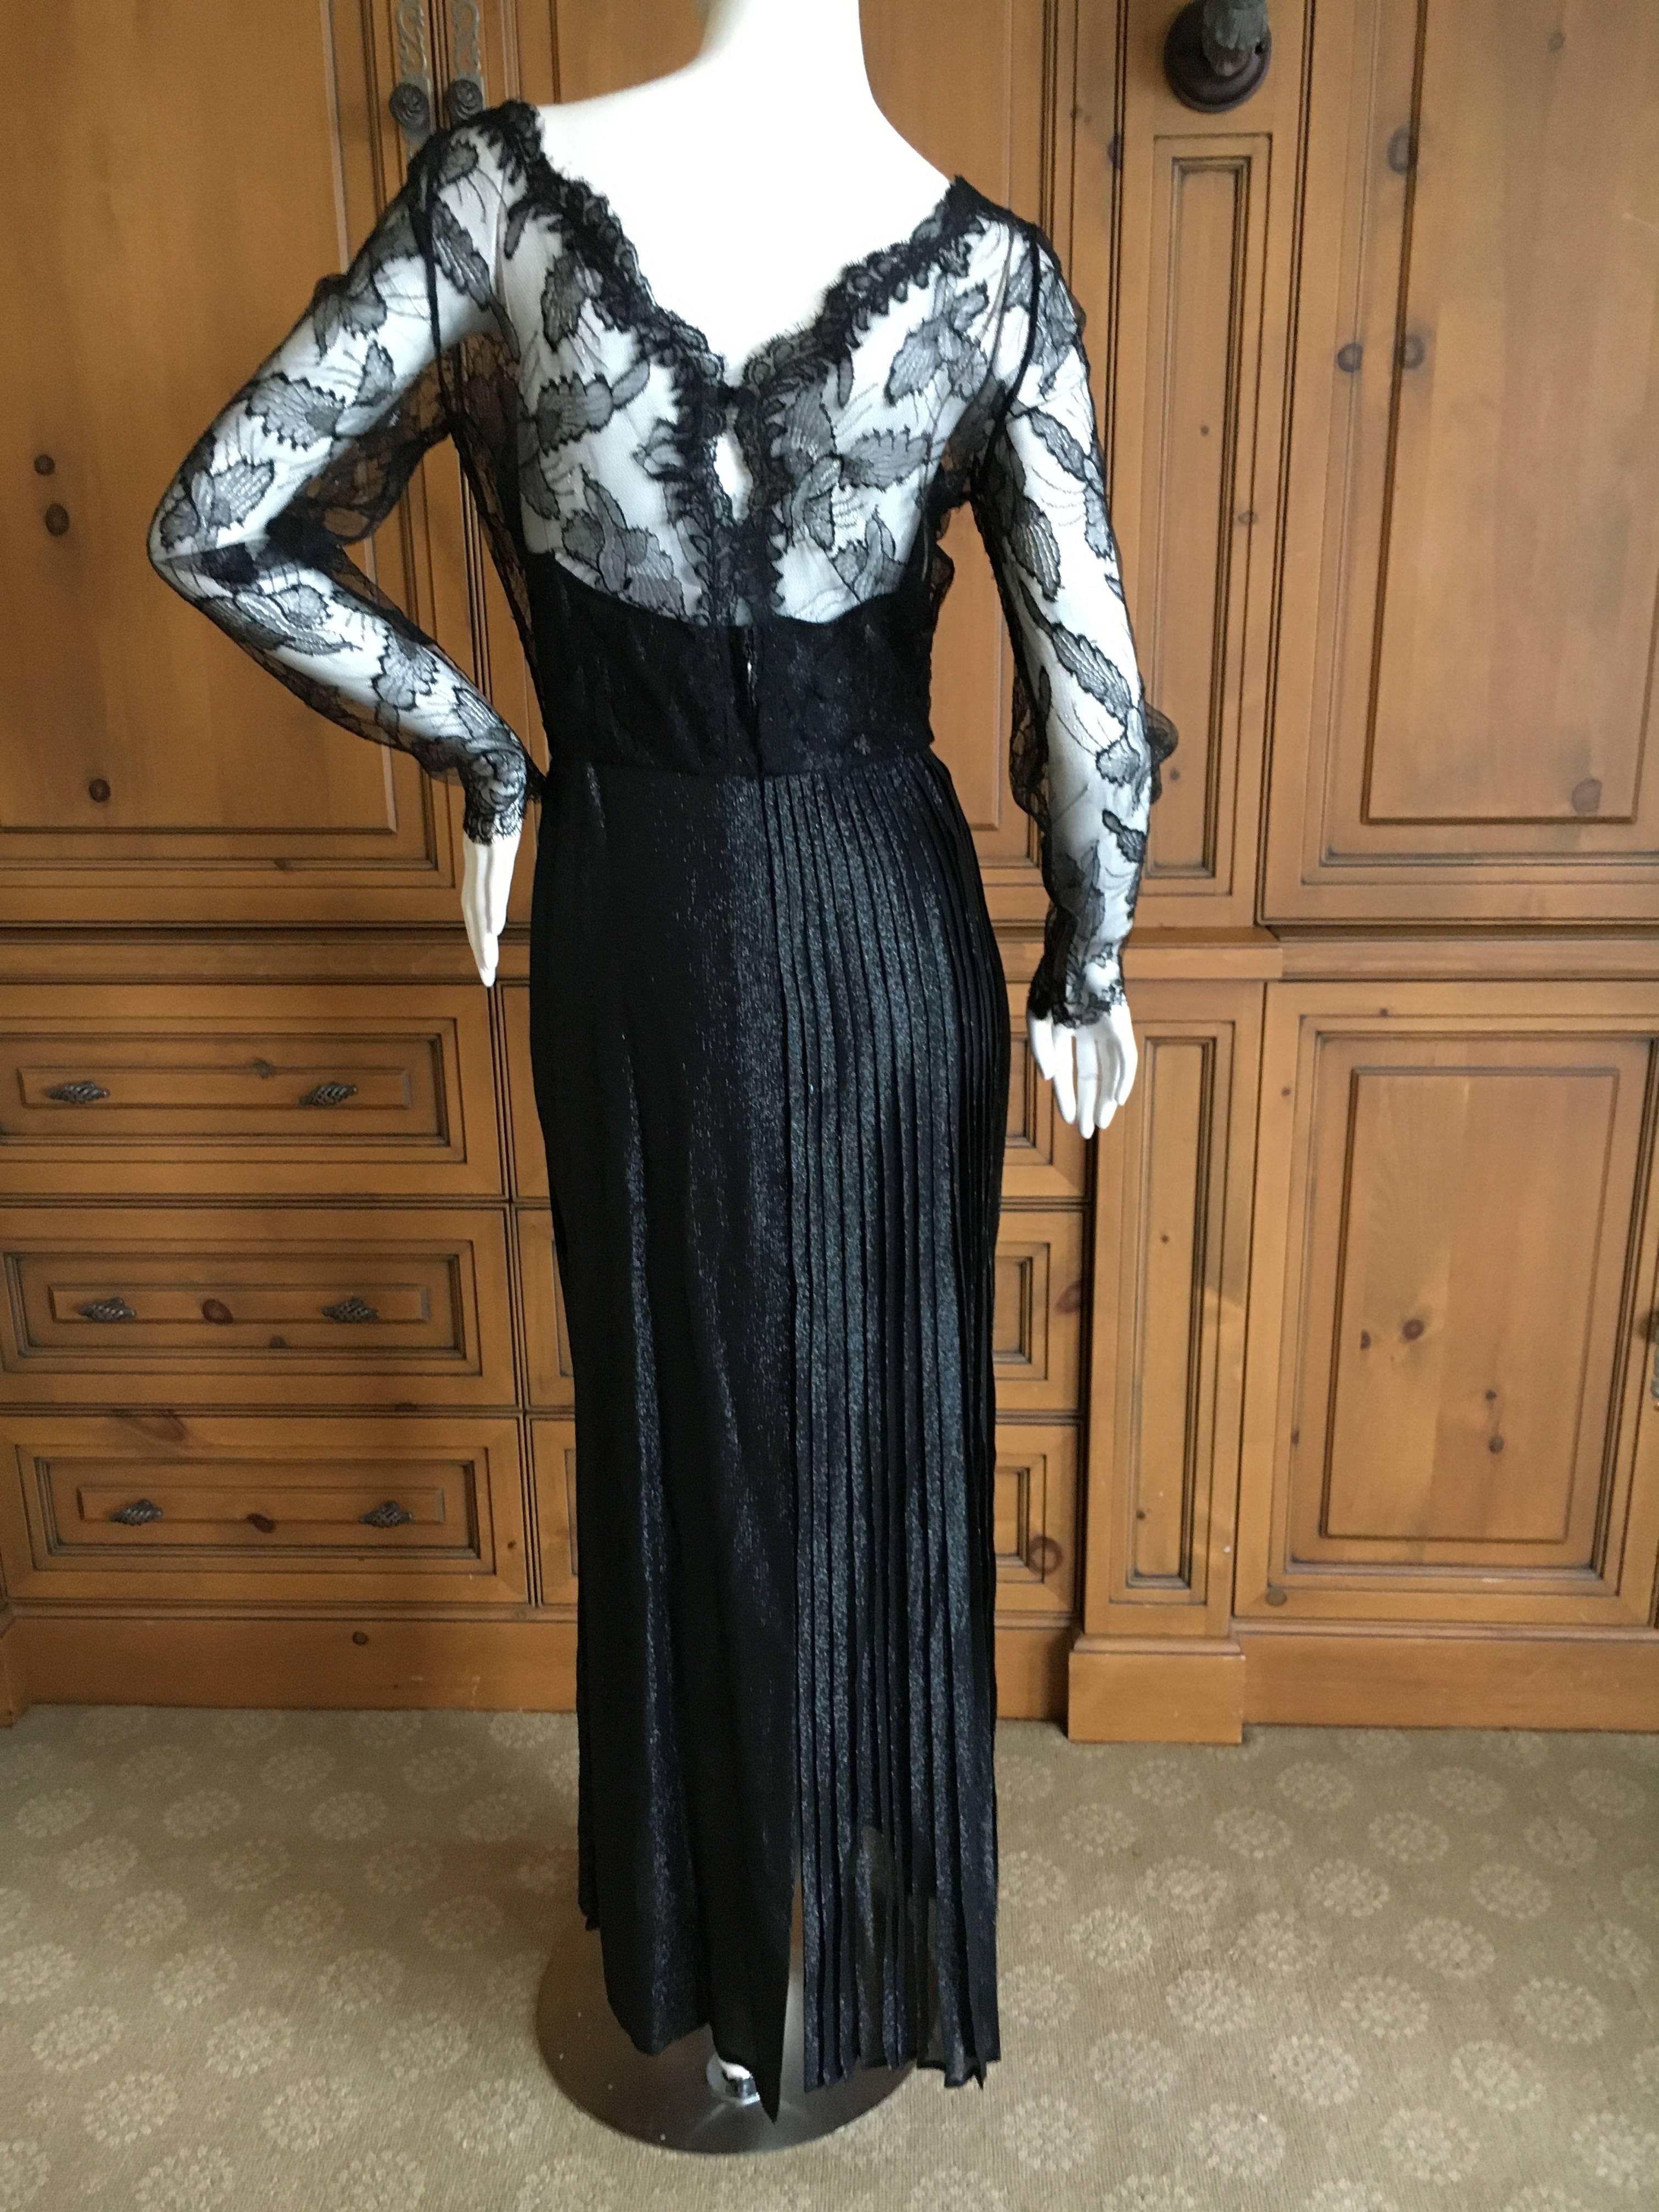 Women's Galanos Black Lace Evening Dress with Pleated Skirt For Sale